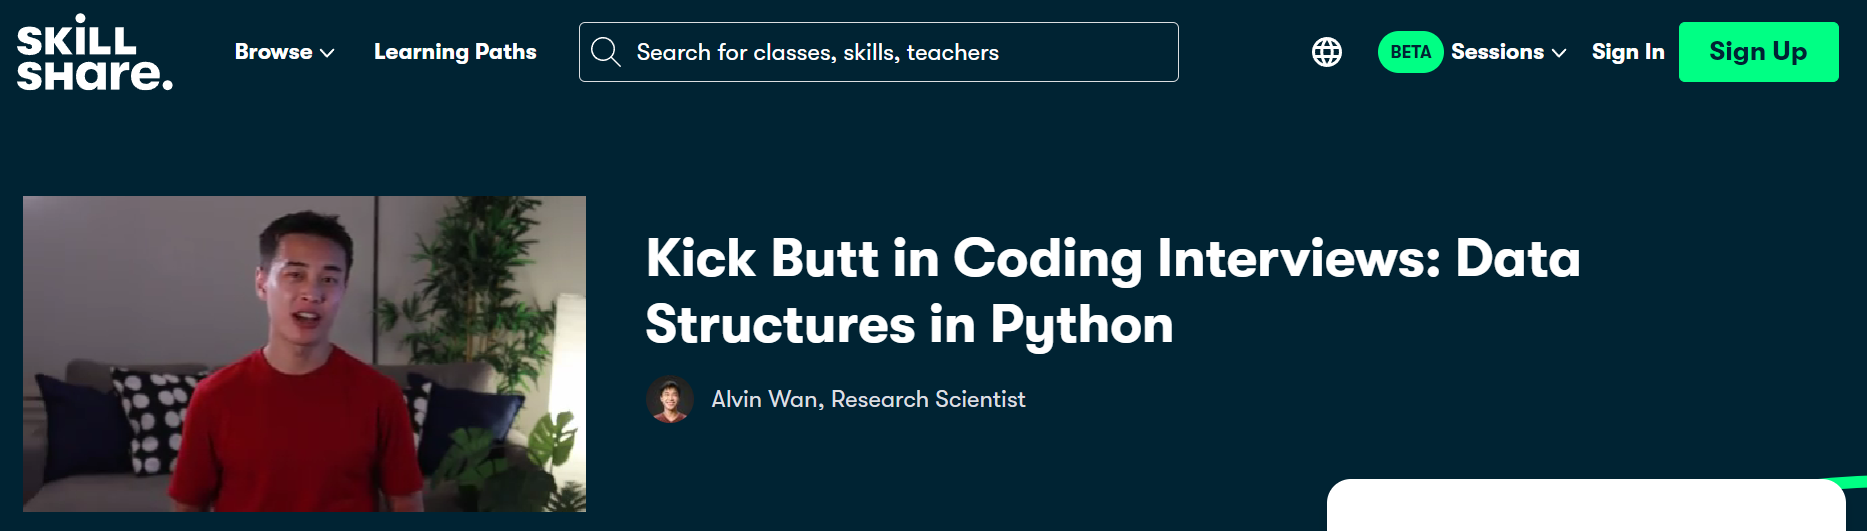 Kick Butt in Coding Interviews: Data Structures in Python